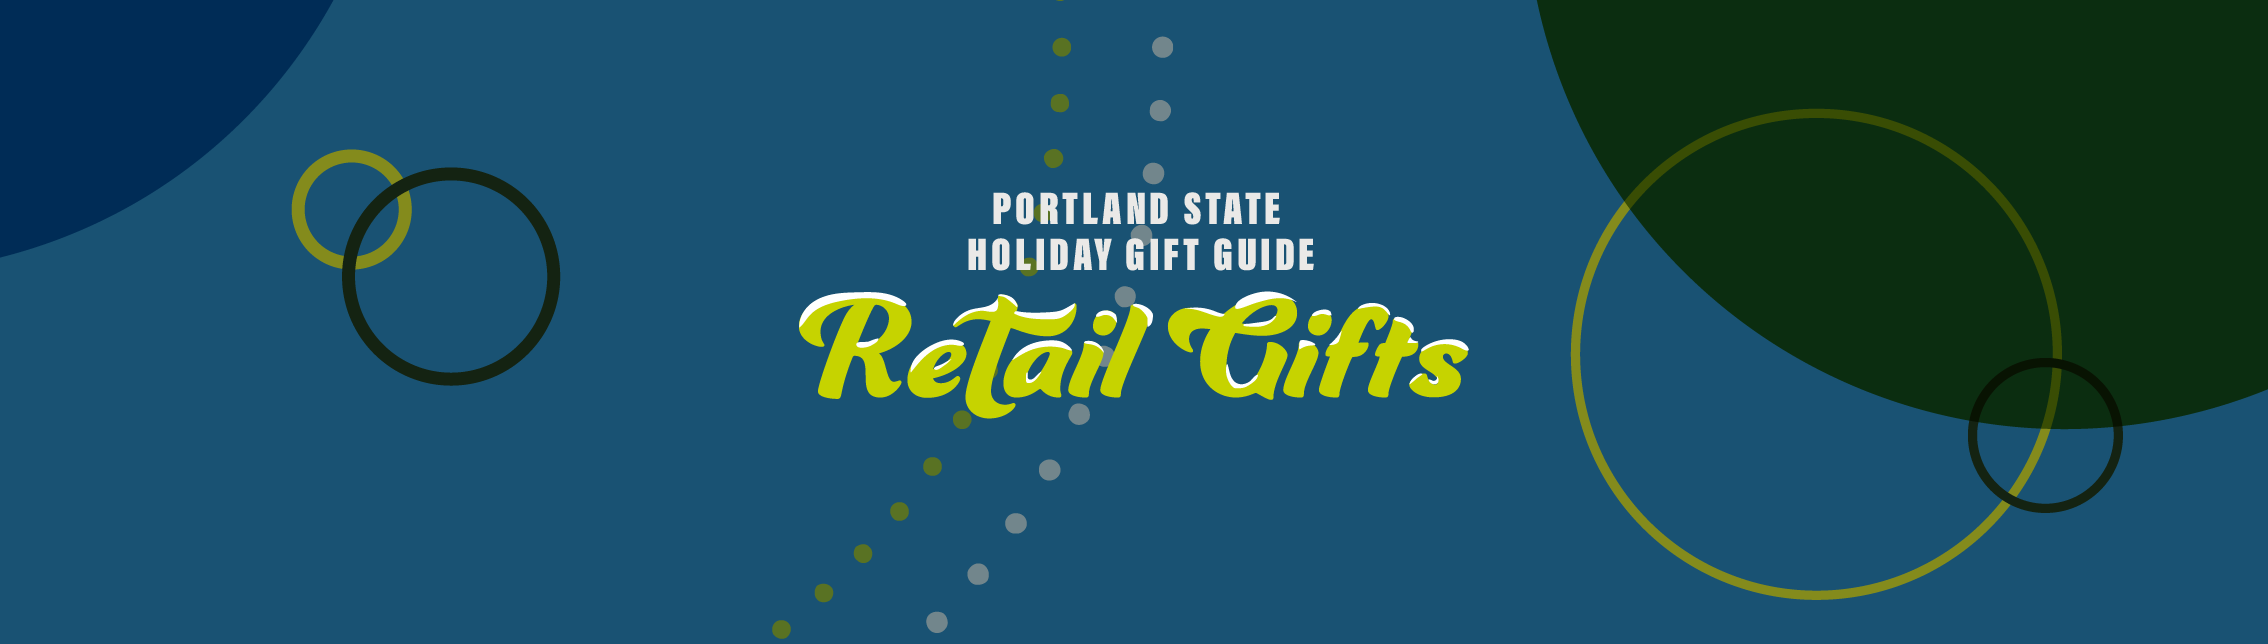 Portland State Holiday Gift Guide Retail Gifts